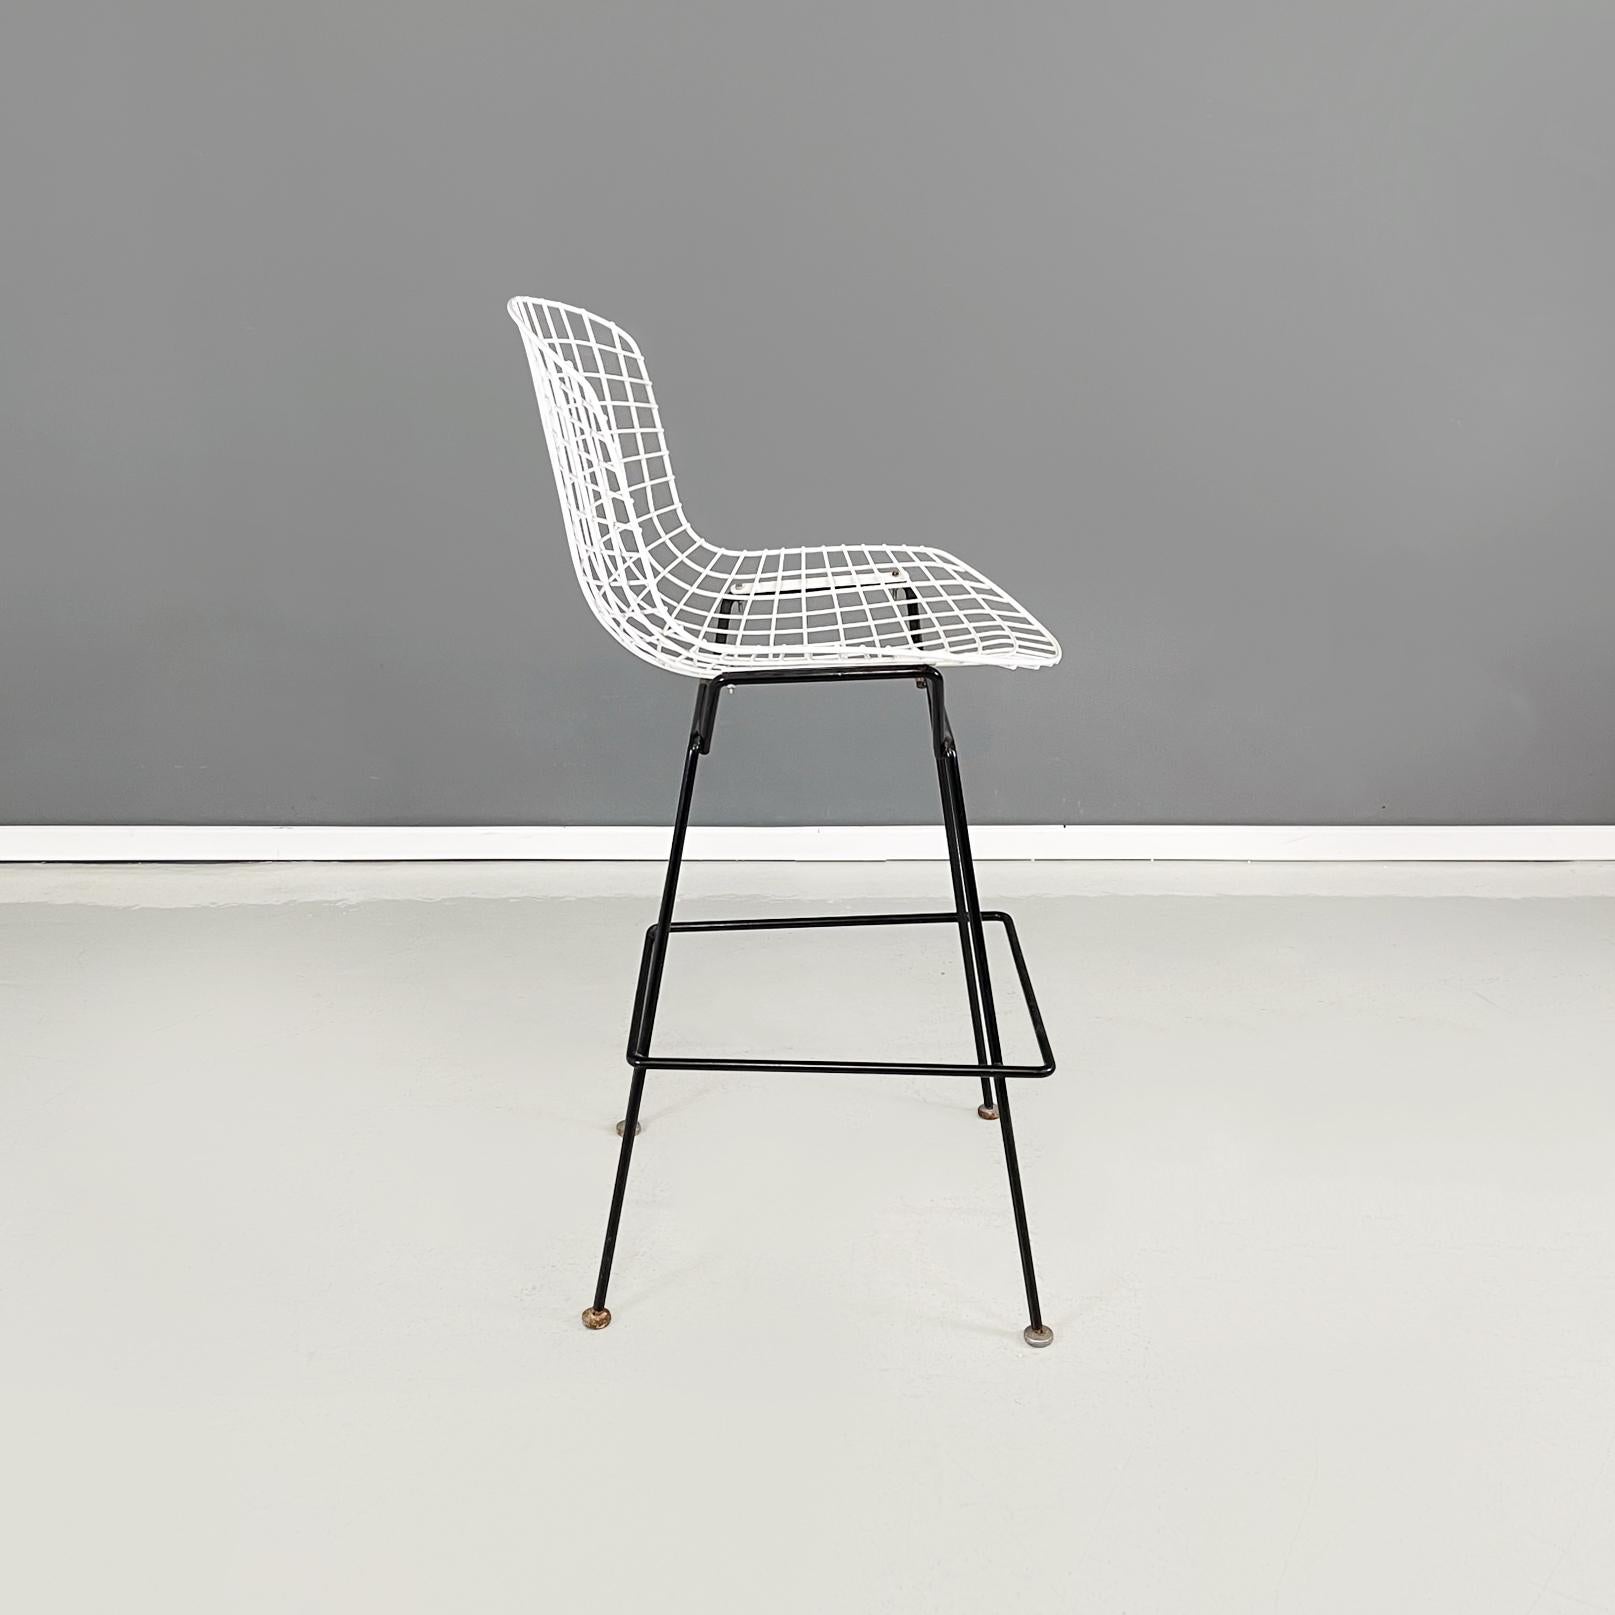 Mid-Century Modern American Midcentury Black White Metal High Stools by Bertoia for Knoll, 1960s For Sale